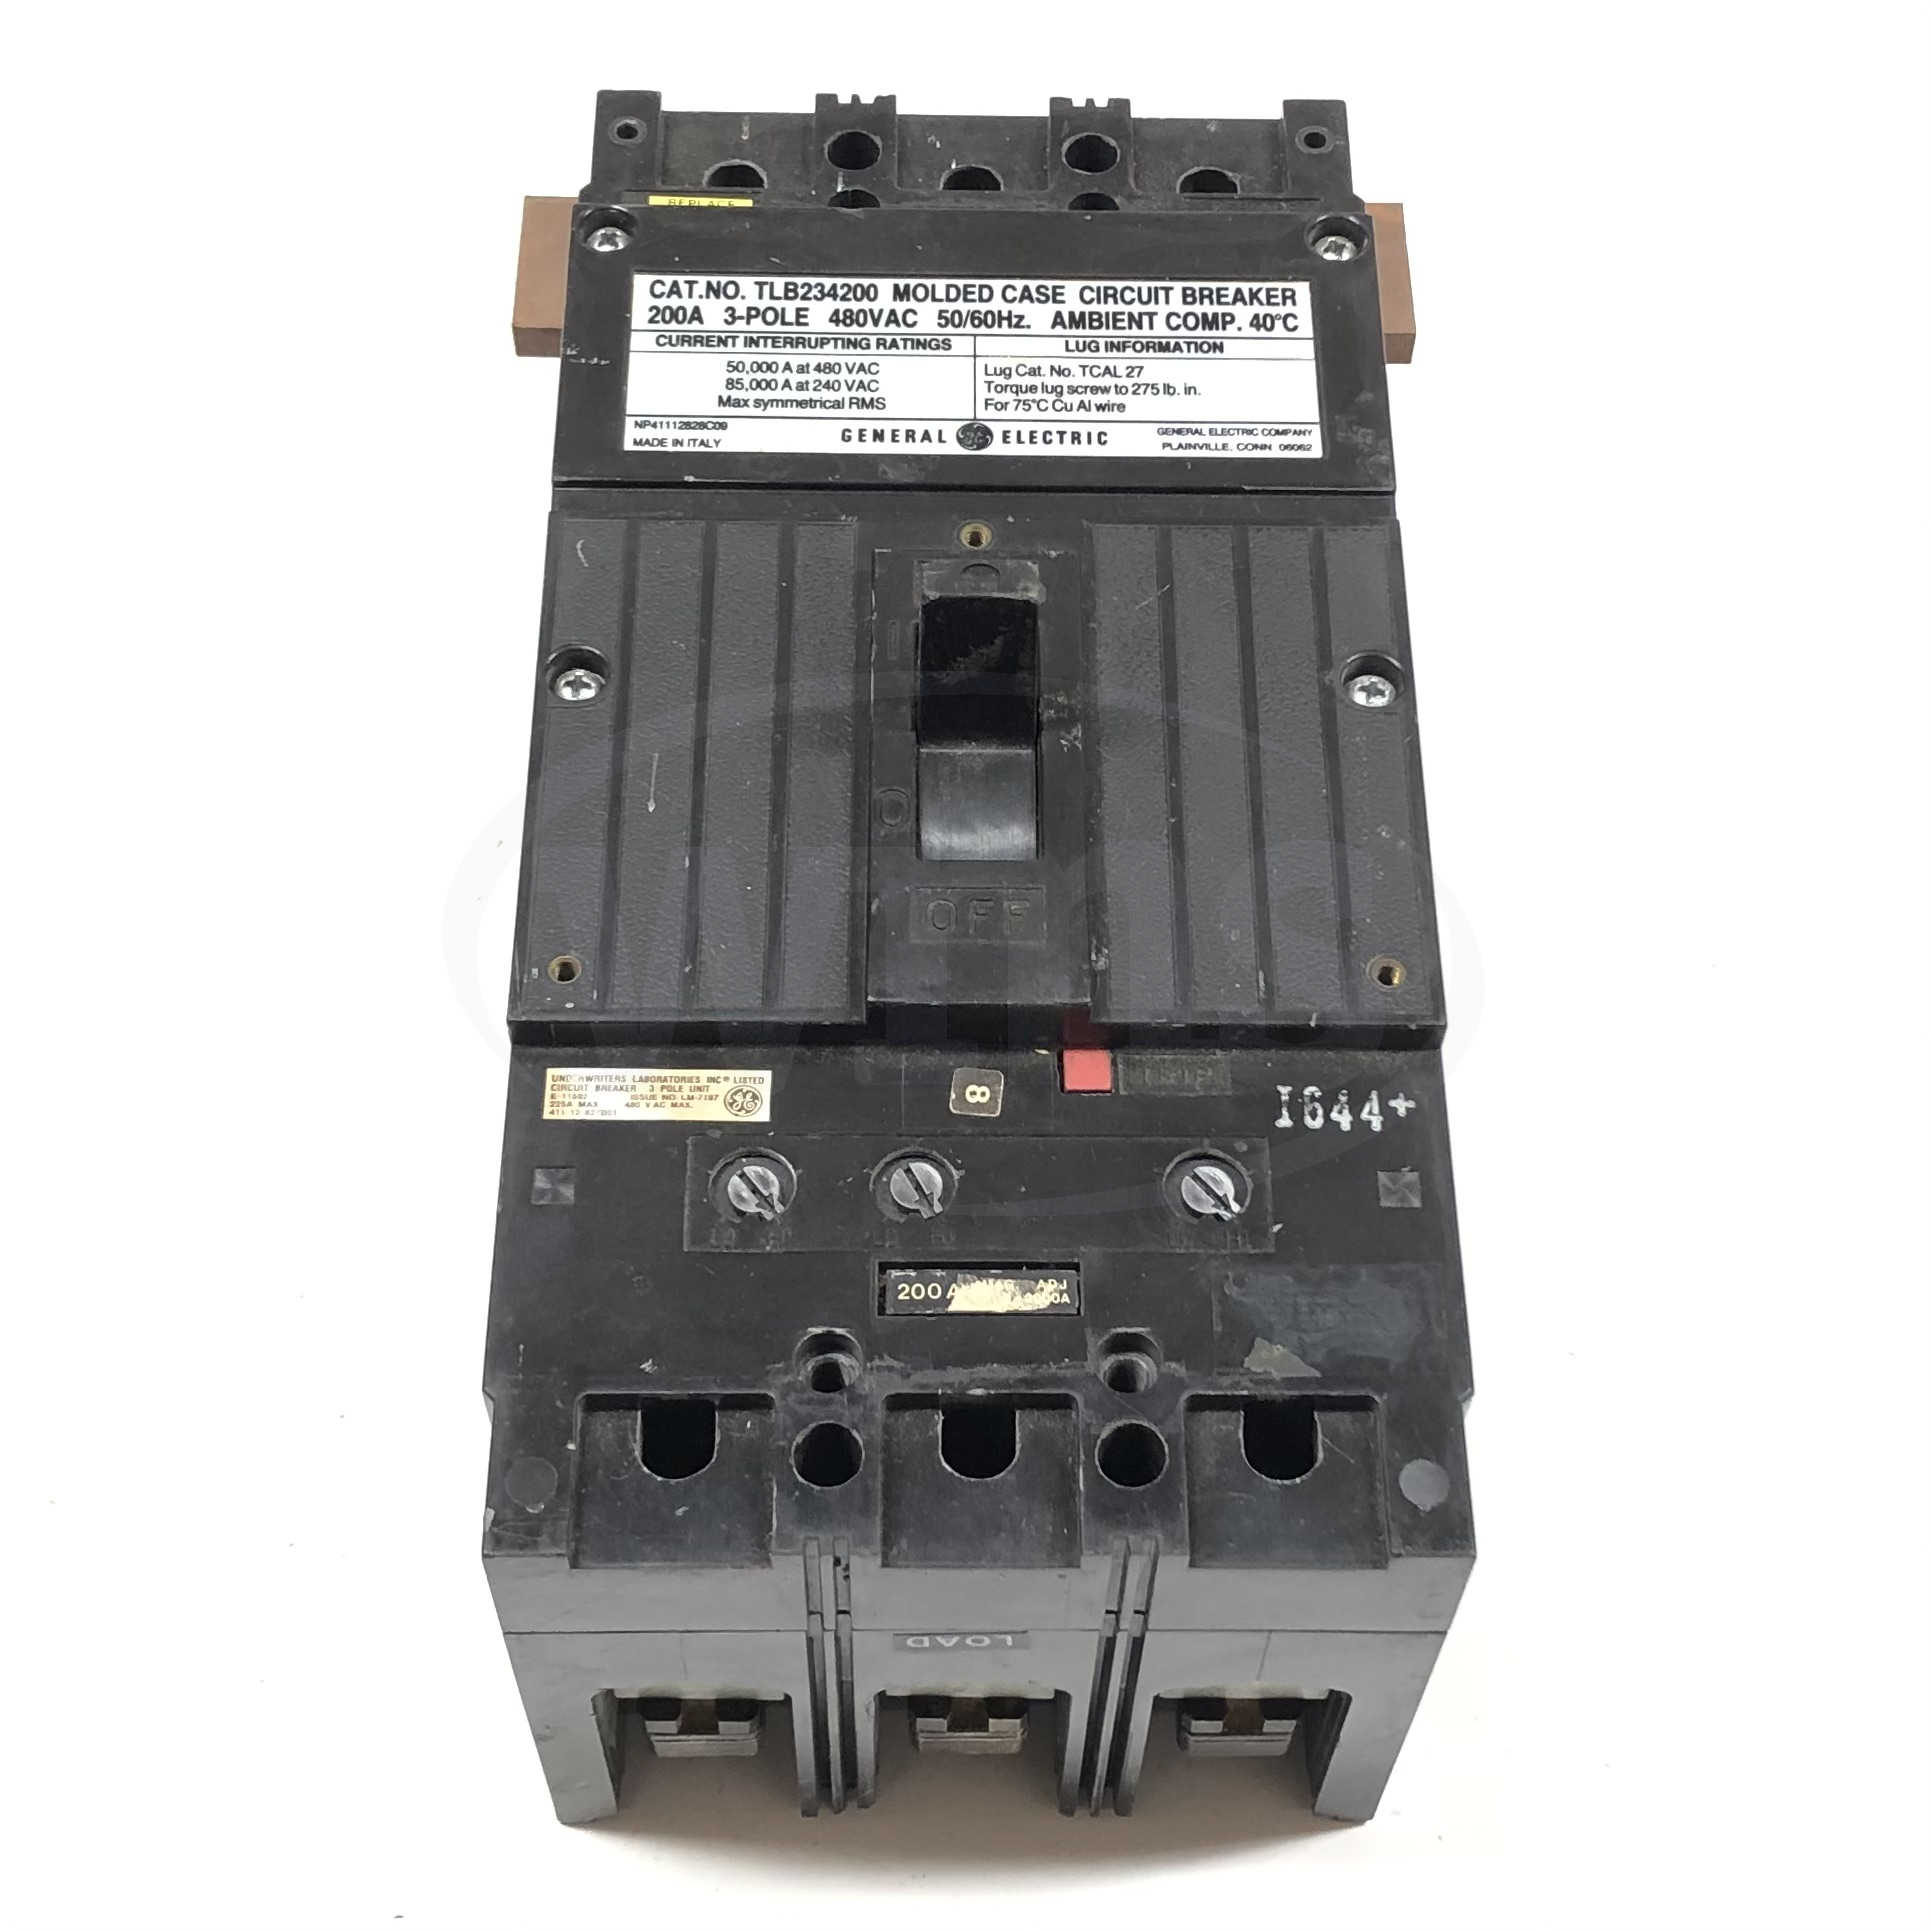 TLB234200 General Electric Molded Case Circuit Breaker, 1